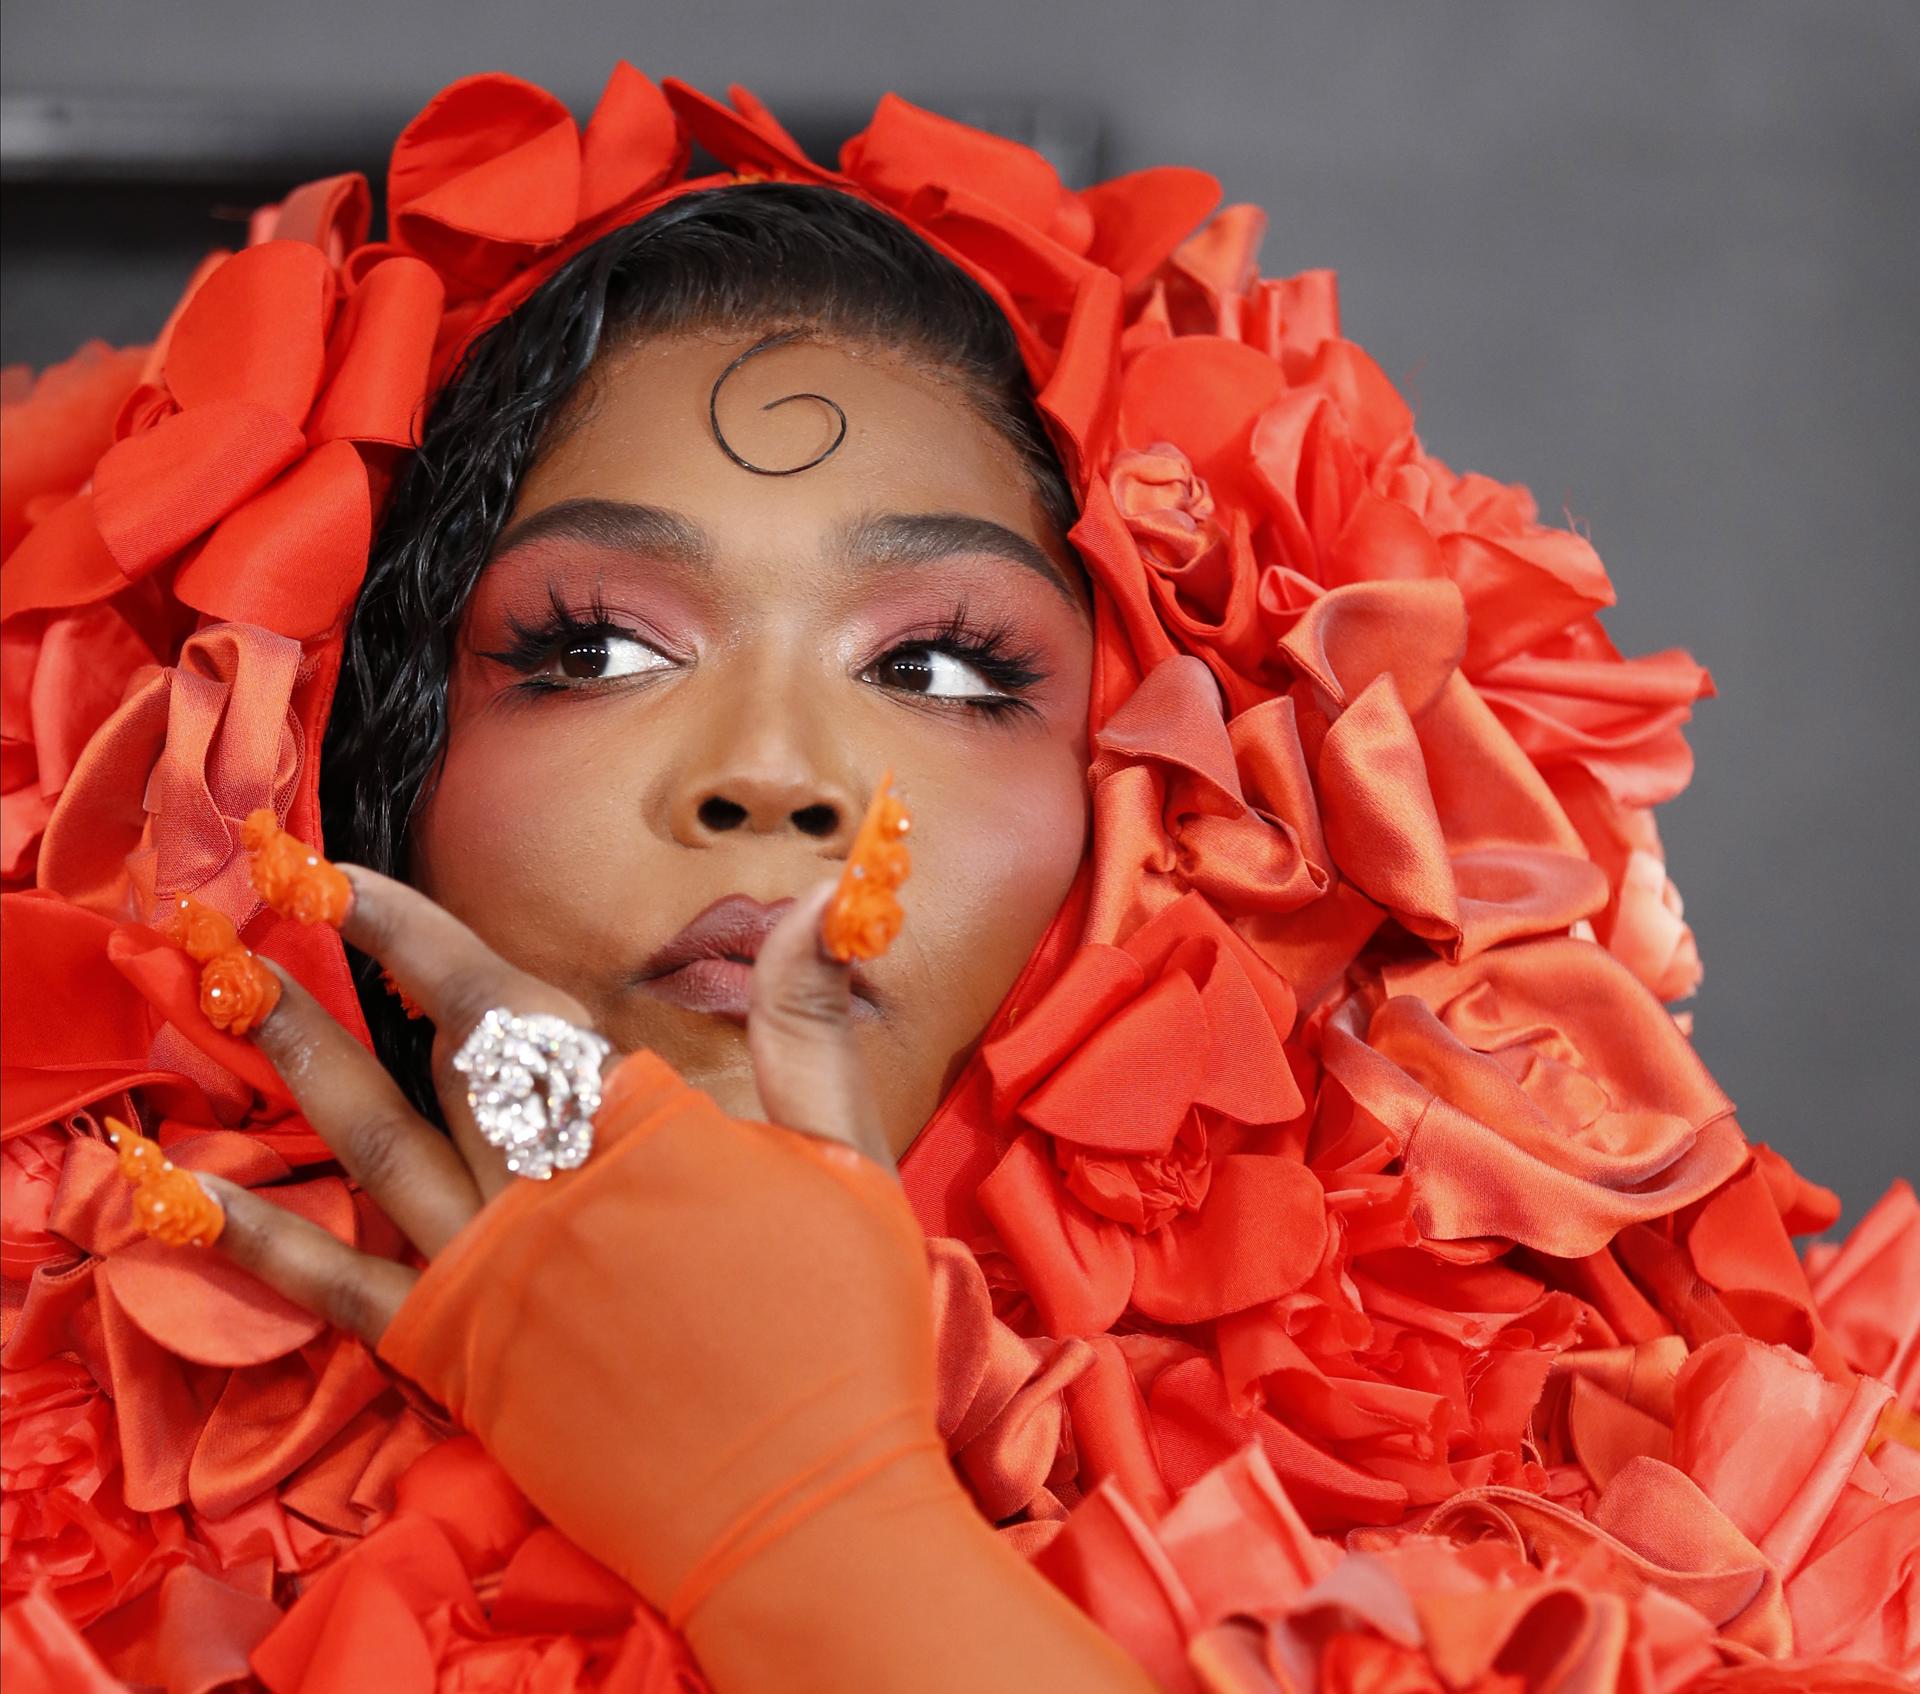 Lizzo arrives for the 65th annual Grammy Awards at the Crypto.com Arena in Los Angeles, California, USA, 05 February 2023. EFE/EPA/CAROLINE BREHMAN